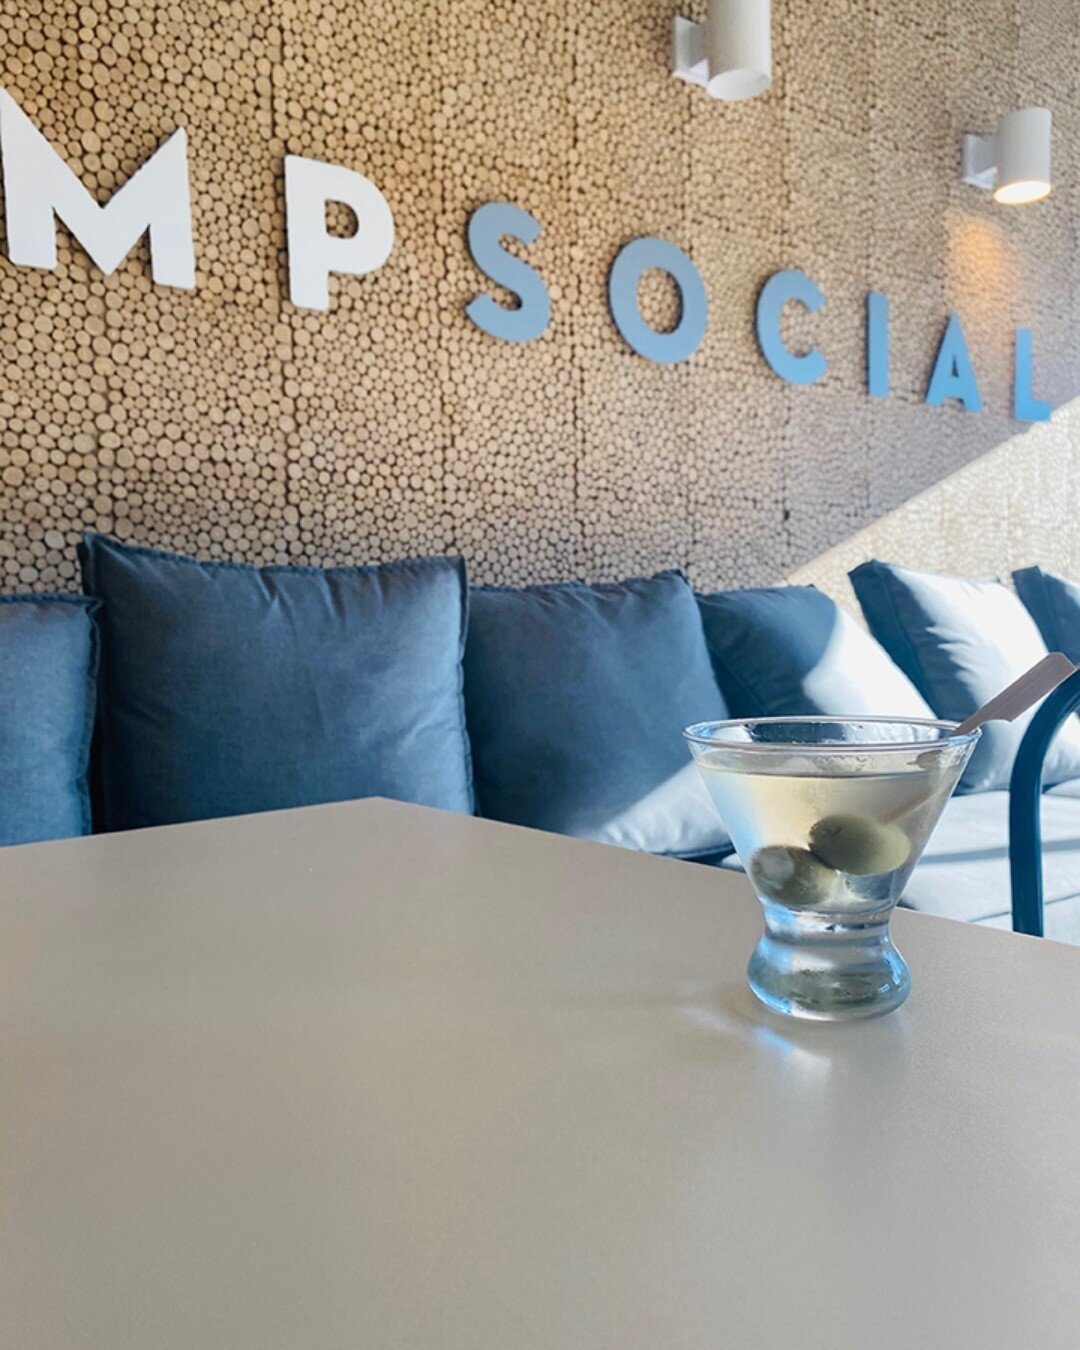 🚨Giveaway Time!🚨
.
.
Leave a comment with your favorite MP Social cocktail below and tag a friend you would drink it with for a chance to win a $15 gift card! 
.
.
#MPSocial #LetsGetSocial #Martini #CocktailBar #DowntownLansing